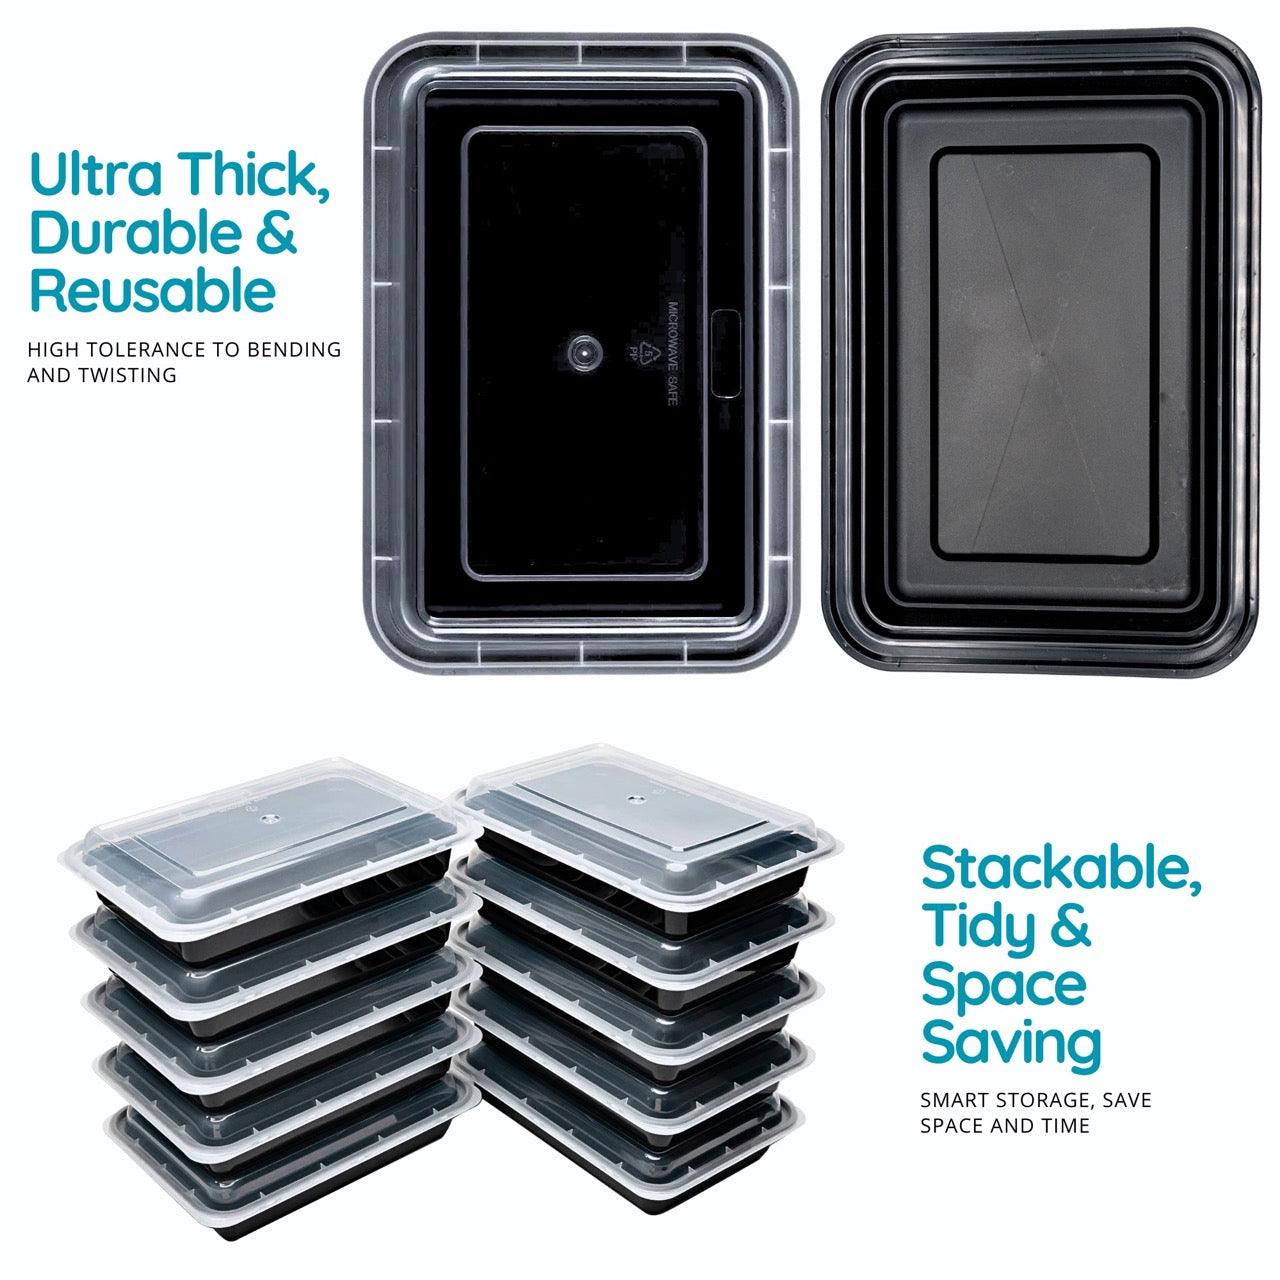 30 Pack 1-Compartment Reusable Meal Prep Containers Black [800ml] - Jugglebox Australia